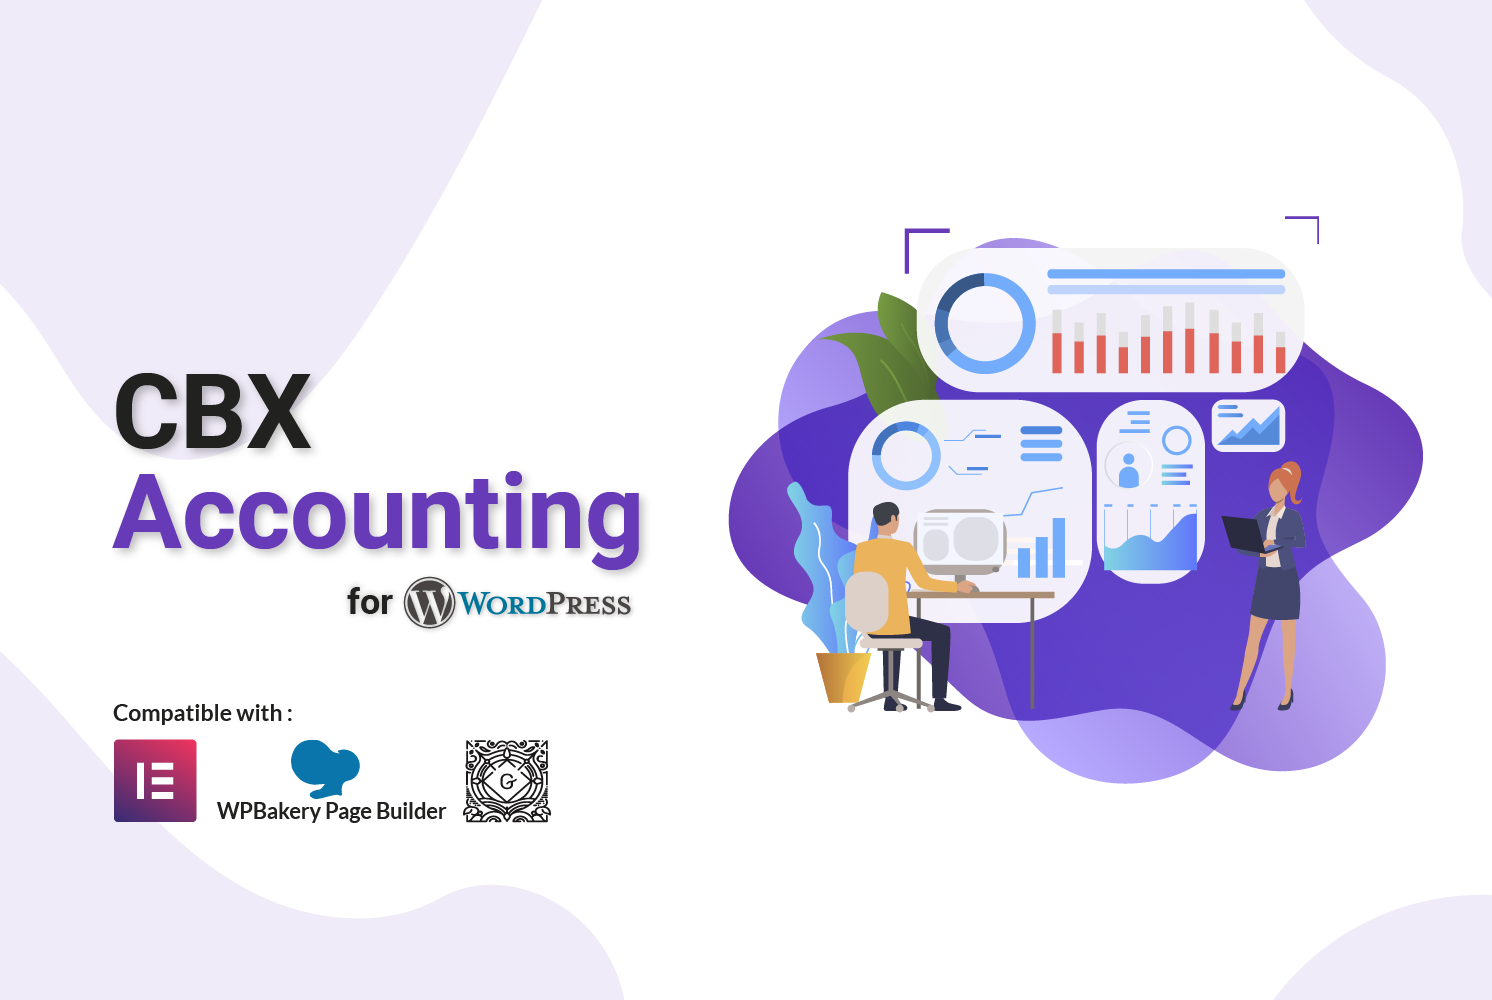 CBX Accounting for WordPress